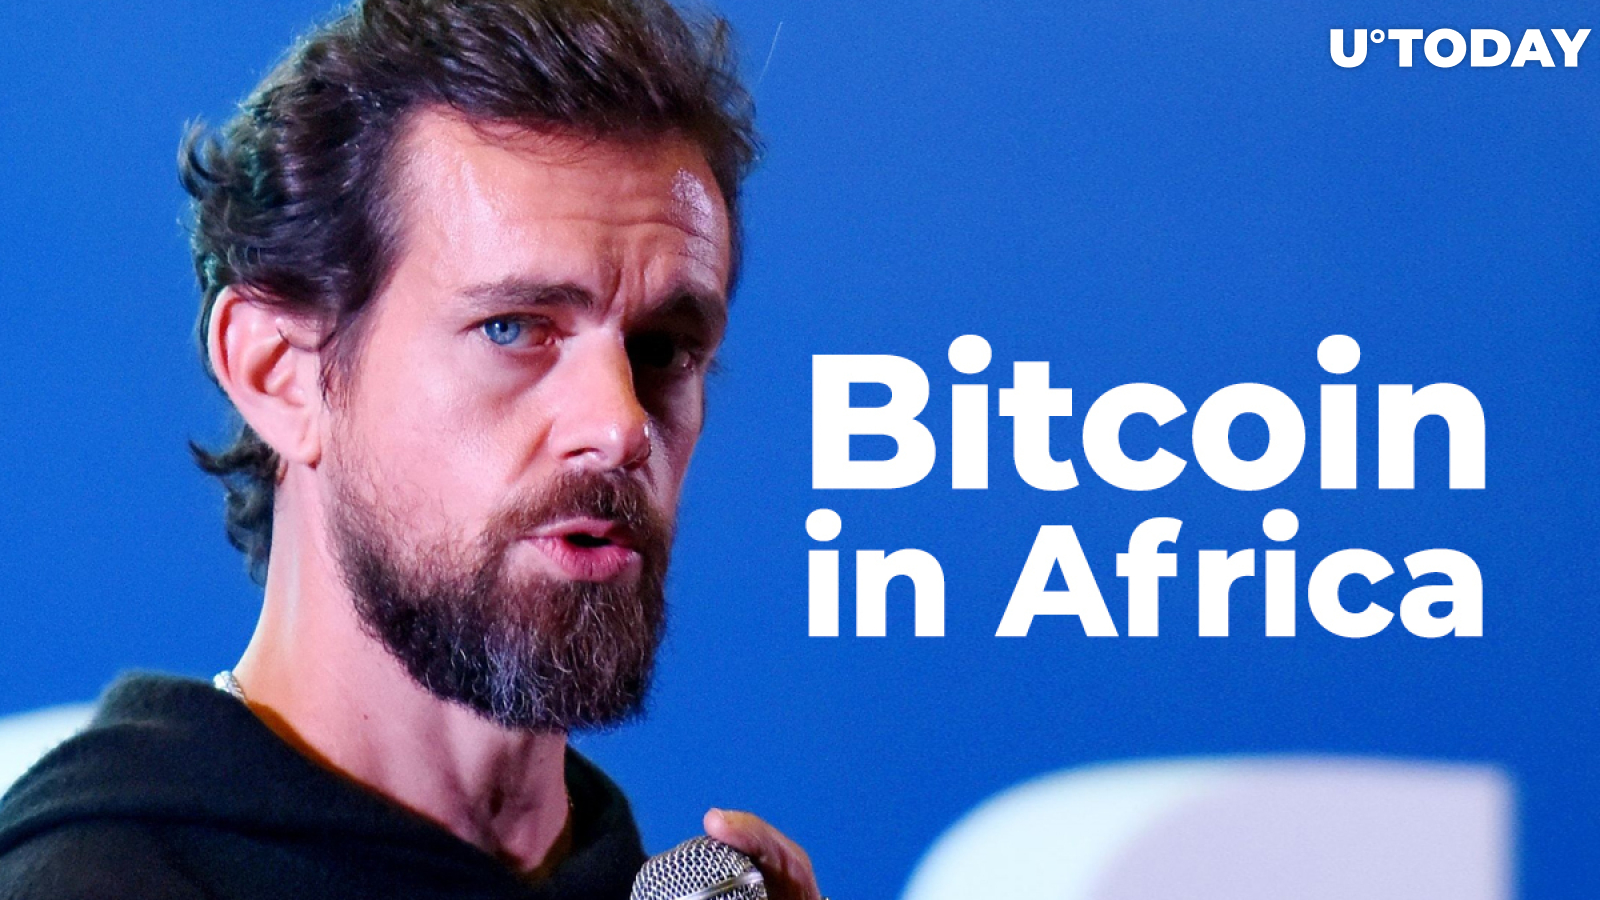 Twitter's CEO to Support Bitcoin in Africa